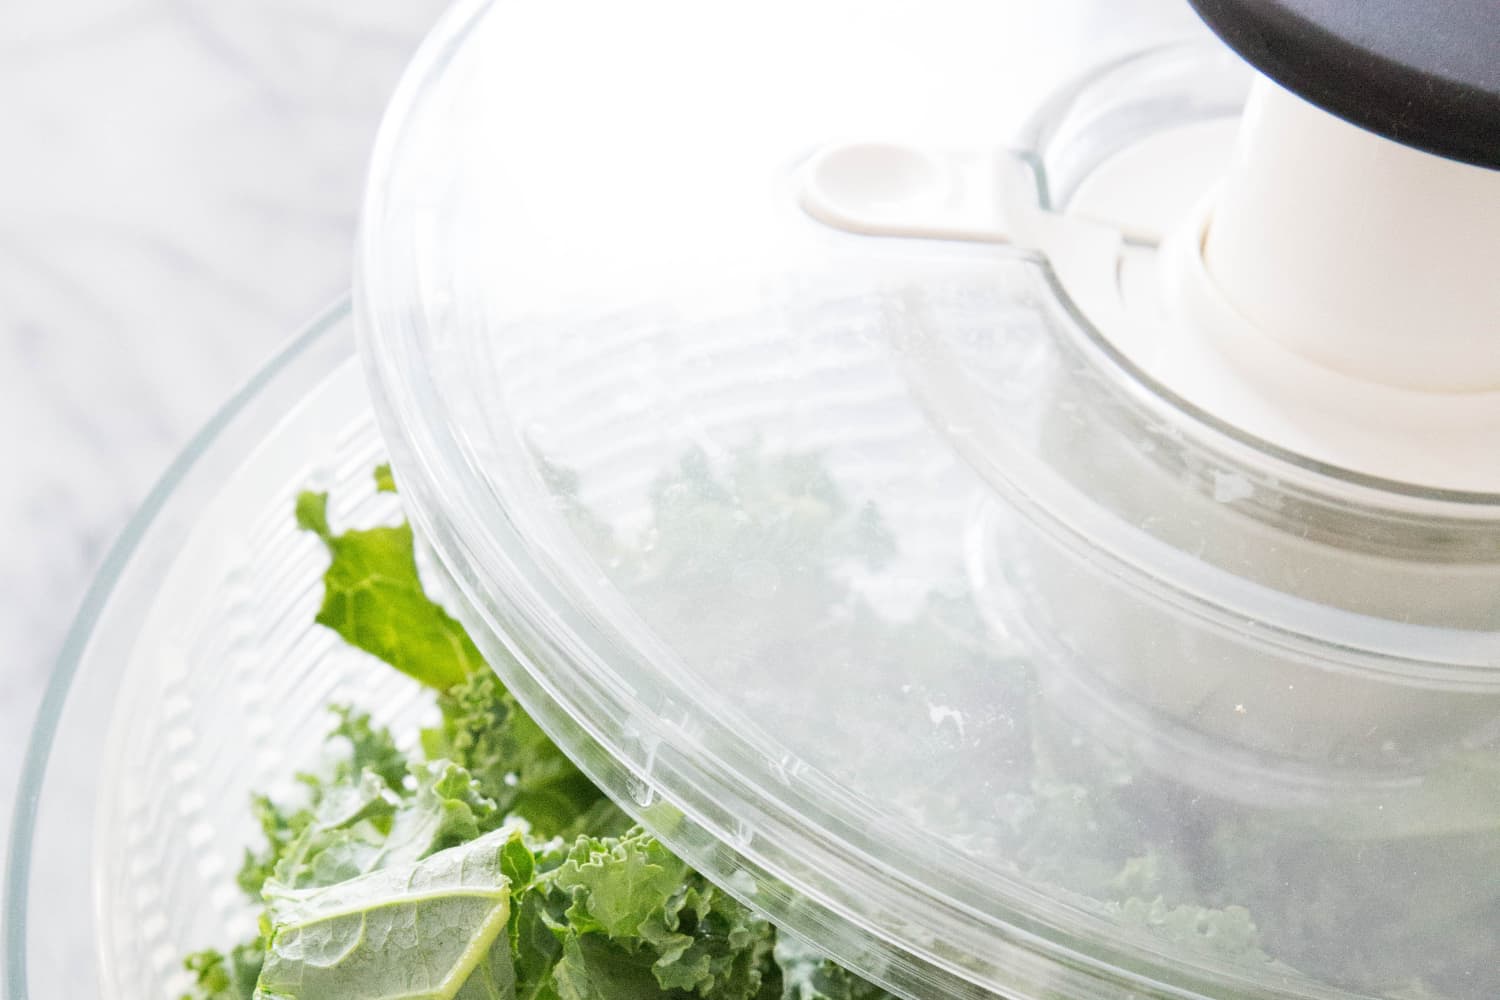 A Salad Spinner Is Good for More Than Salads